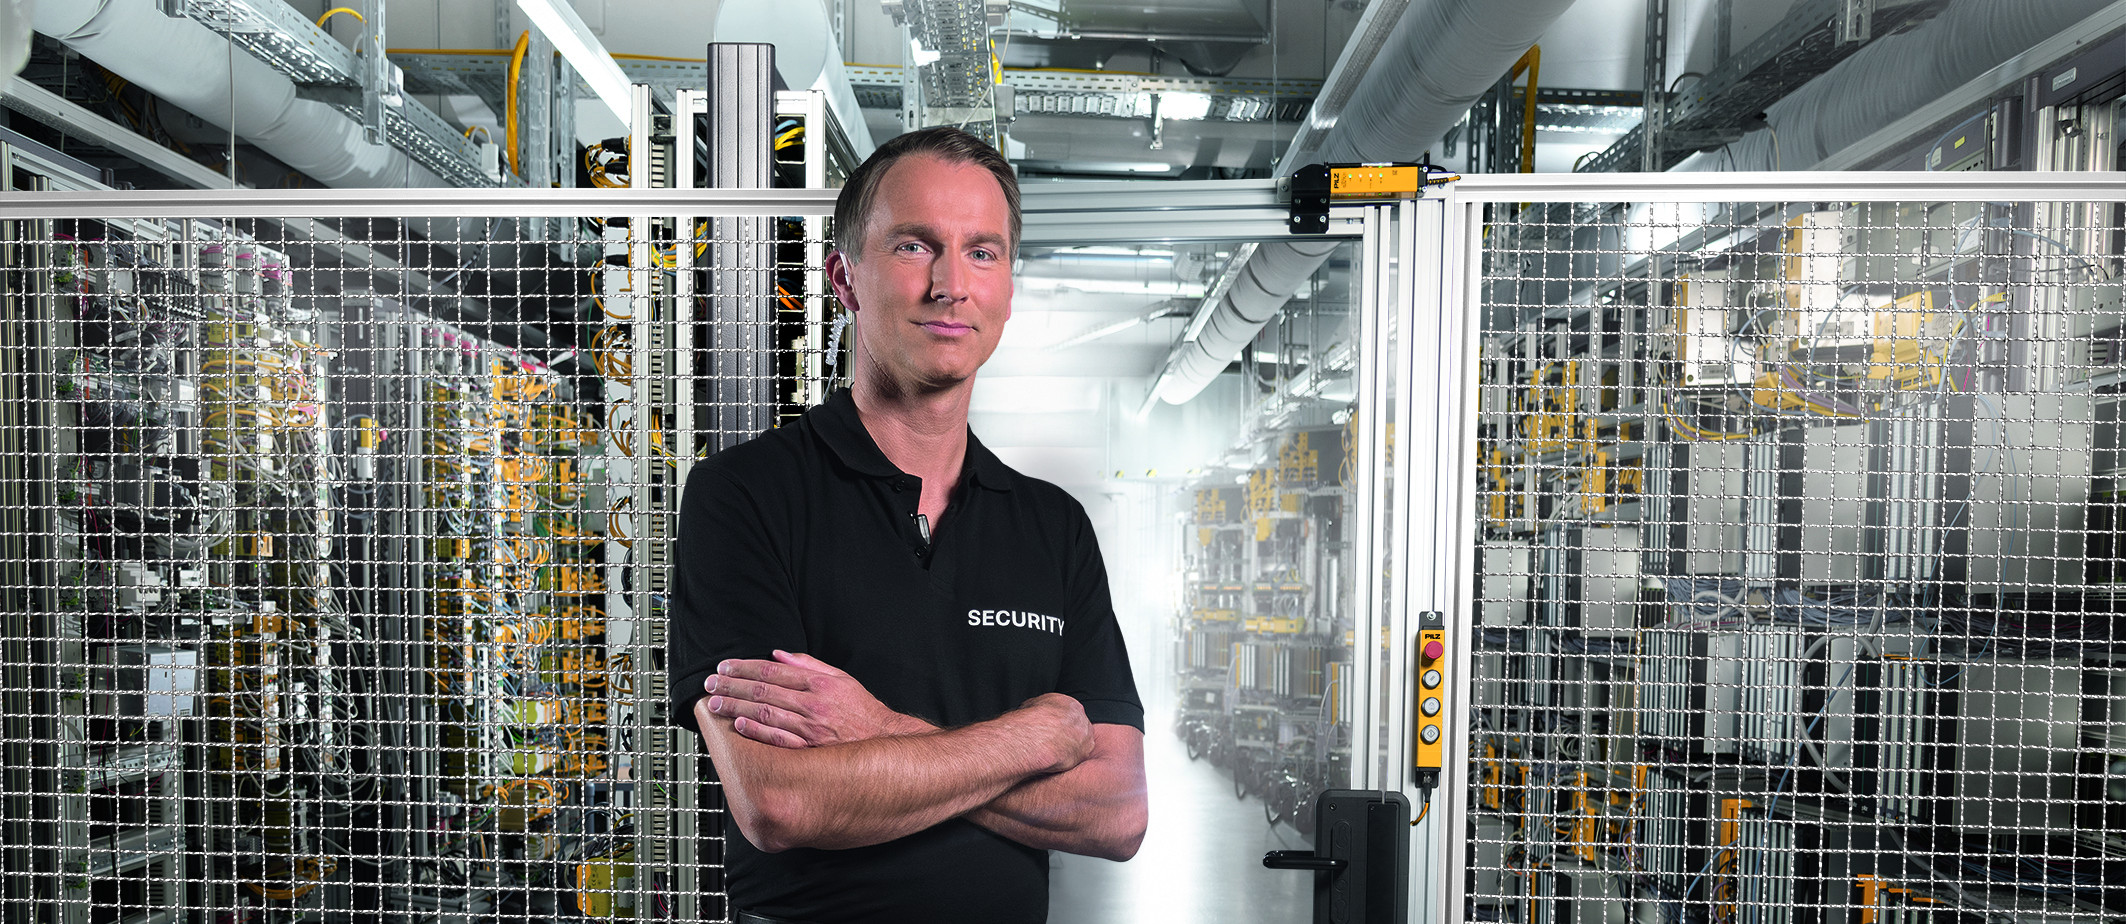 As a manufacturer of safe automation solutions, Pilz pays equal attention to safety and industrial security aspects - right from the product development stage © Pilz